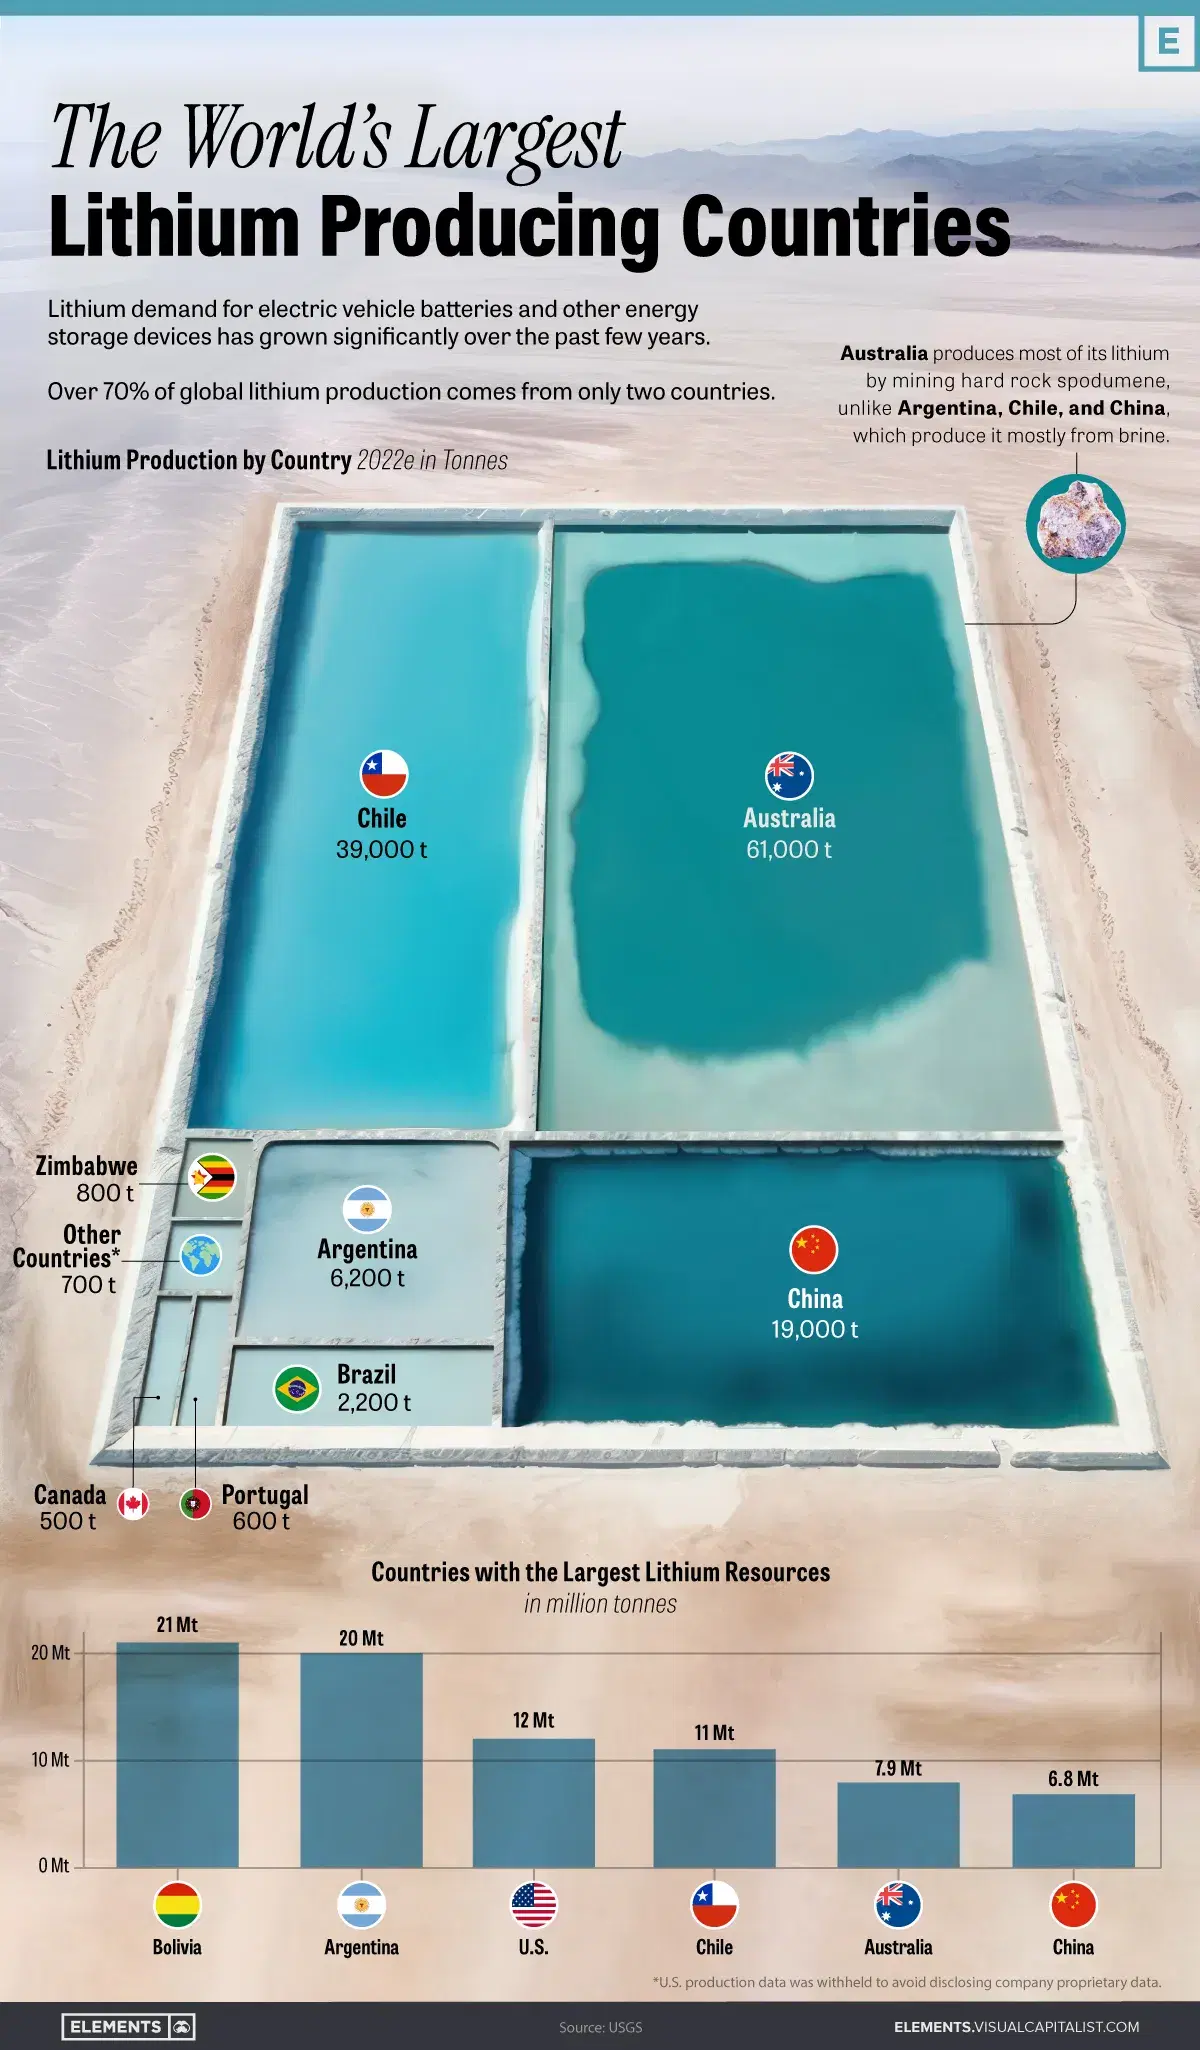 Visualizing the World’s Largest Lithium Producing Nations